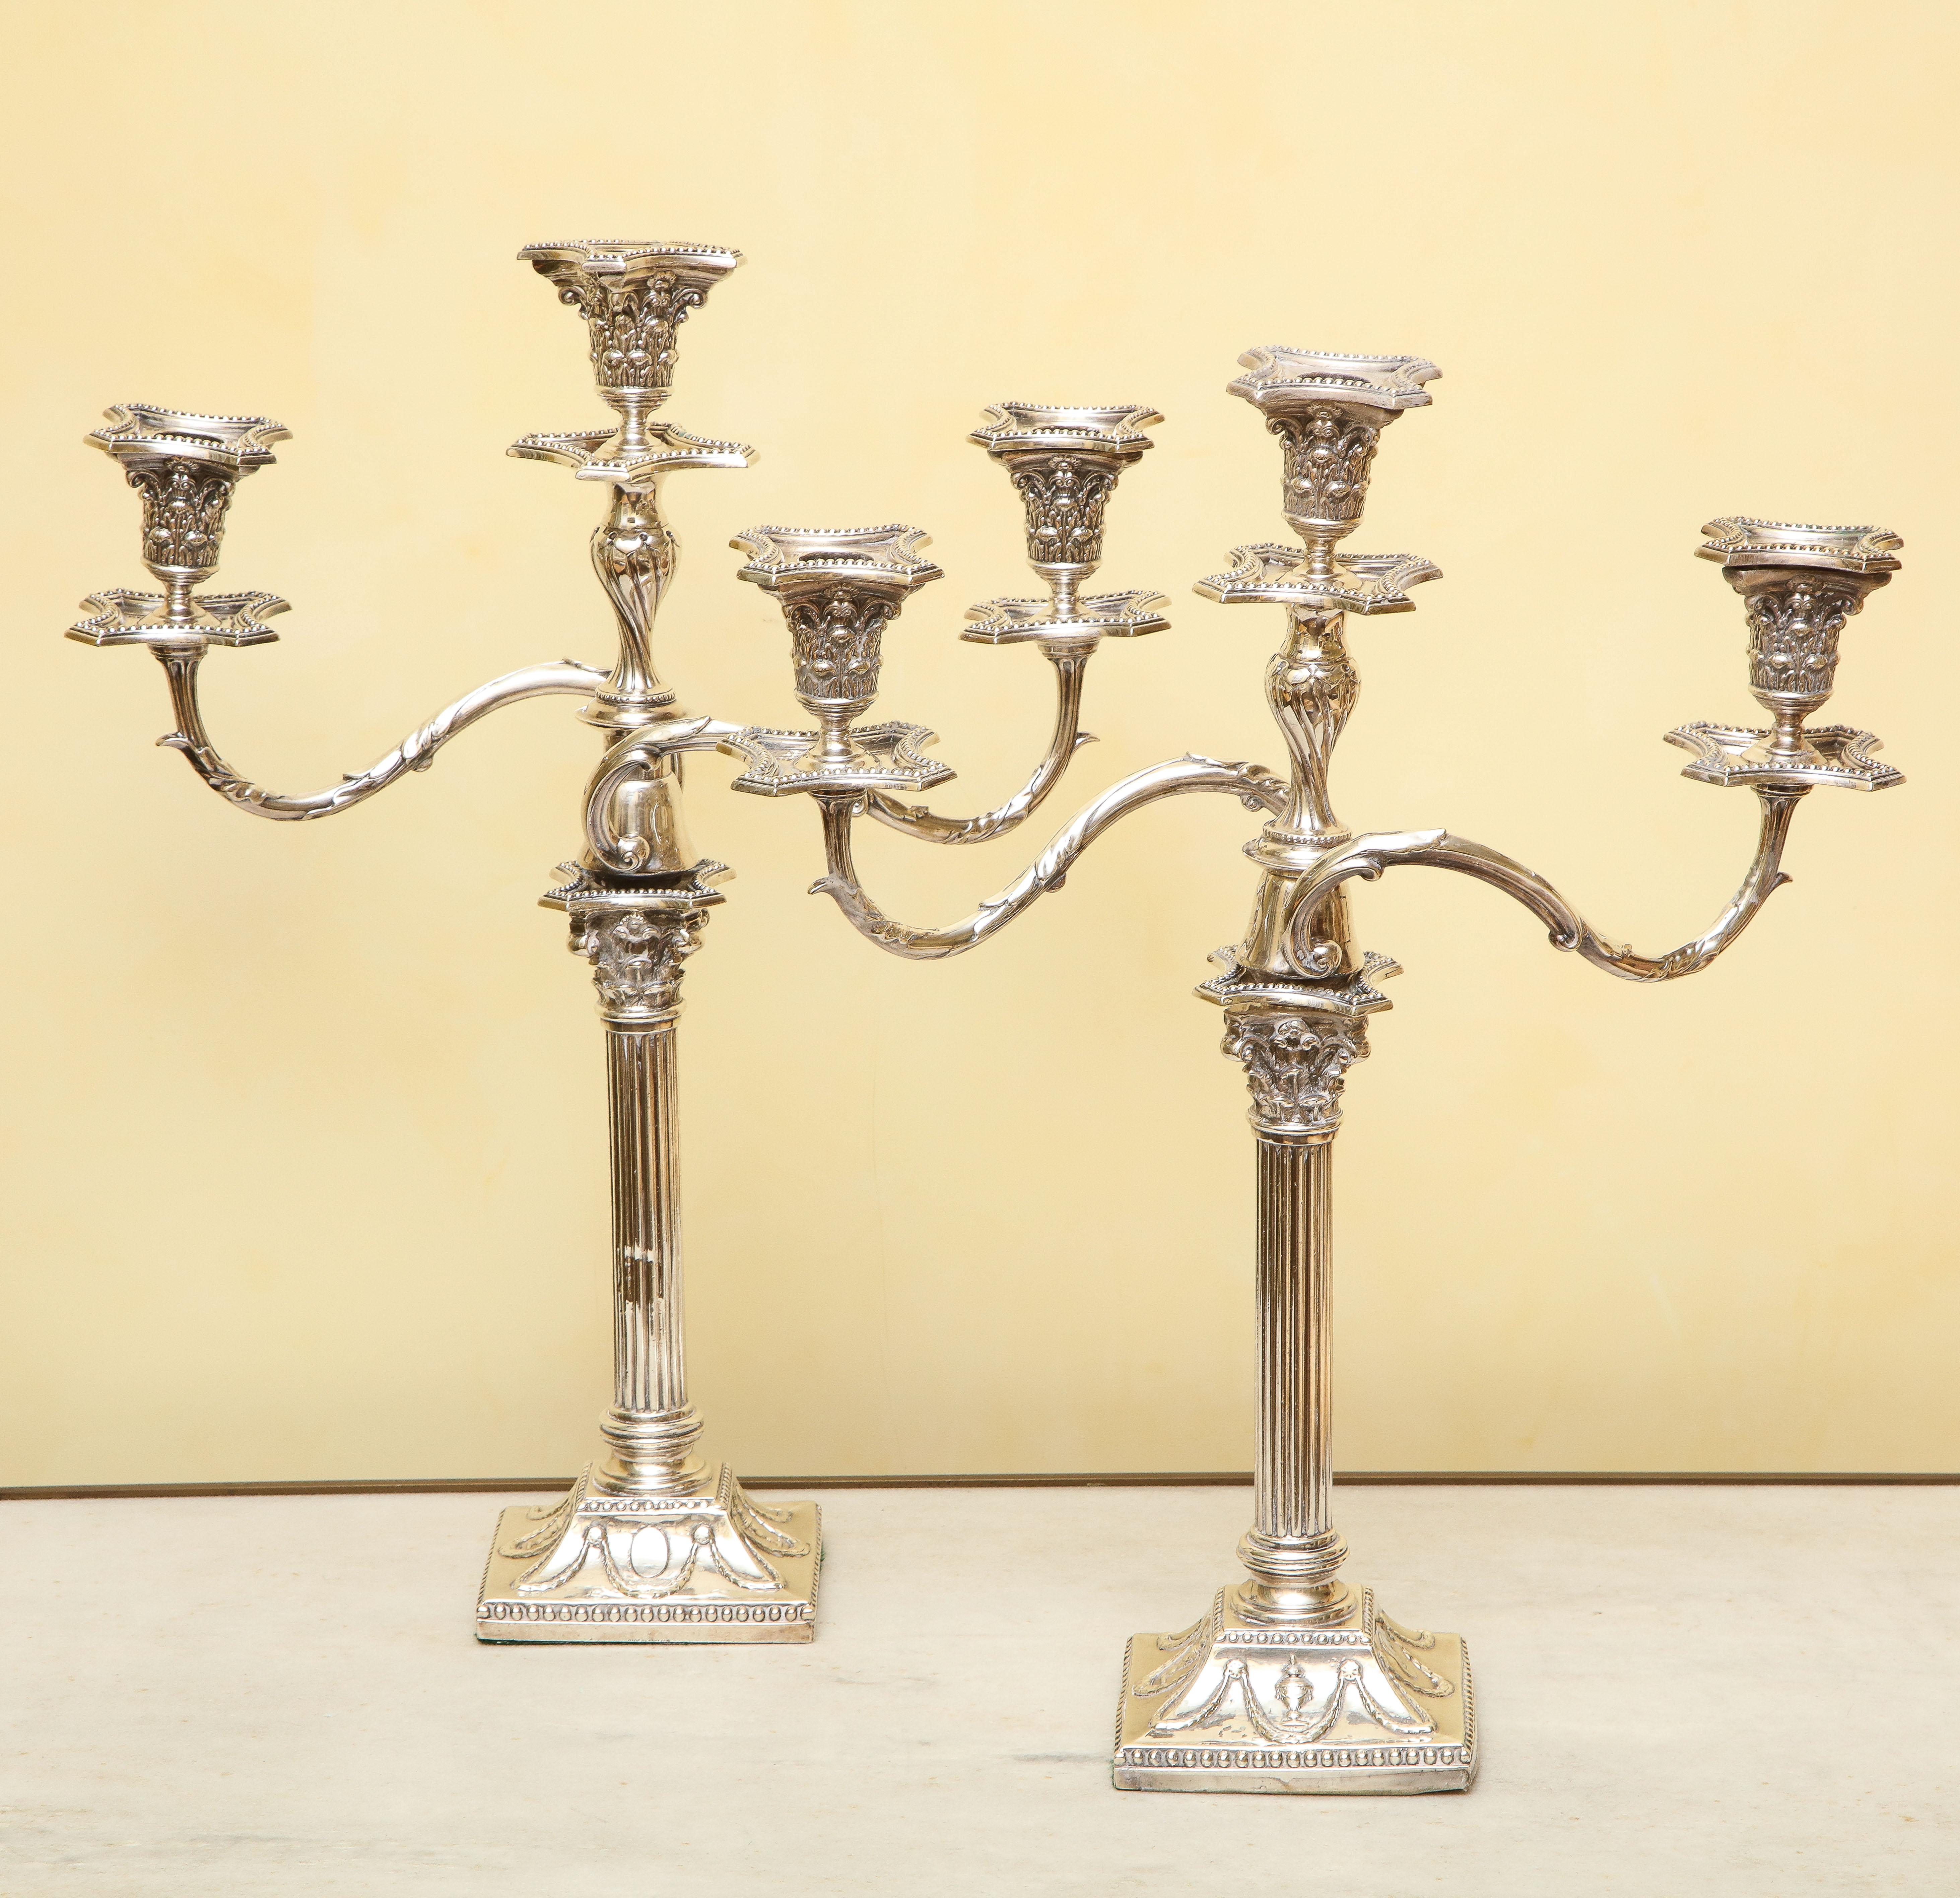 A pair of silver-plated George III-style convertible candelabra candlesticks. The three-light Gilded Age Georgian style candelabra branches detach into a single pair of candlesticks to allow for conversion. 

Provenance: “Rock Cliff”, formerly